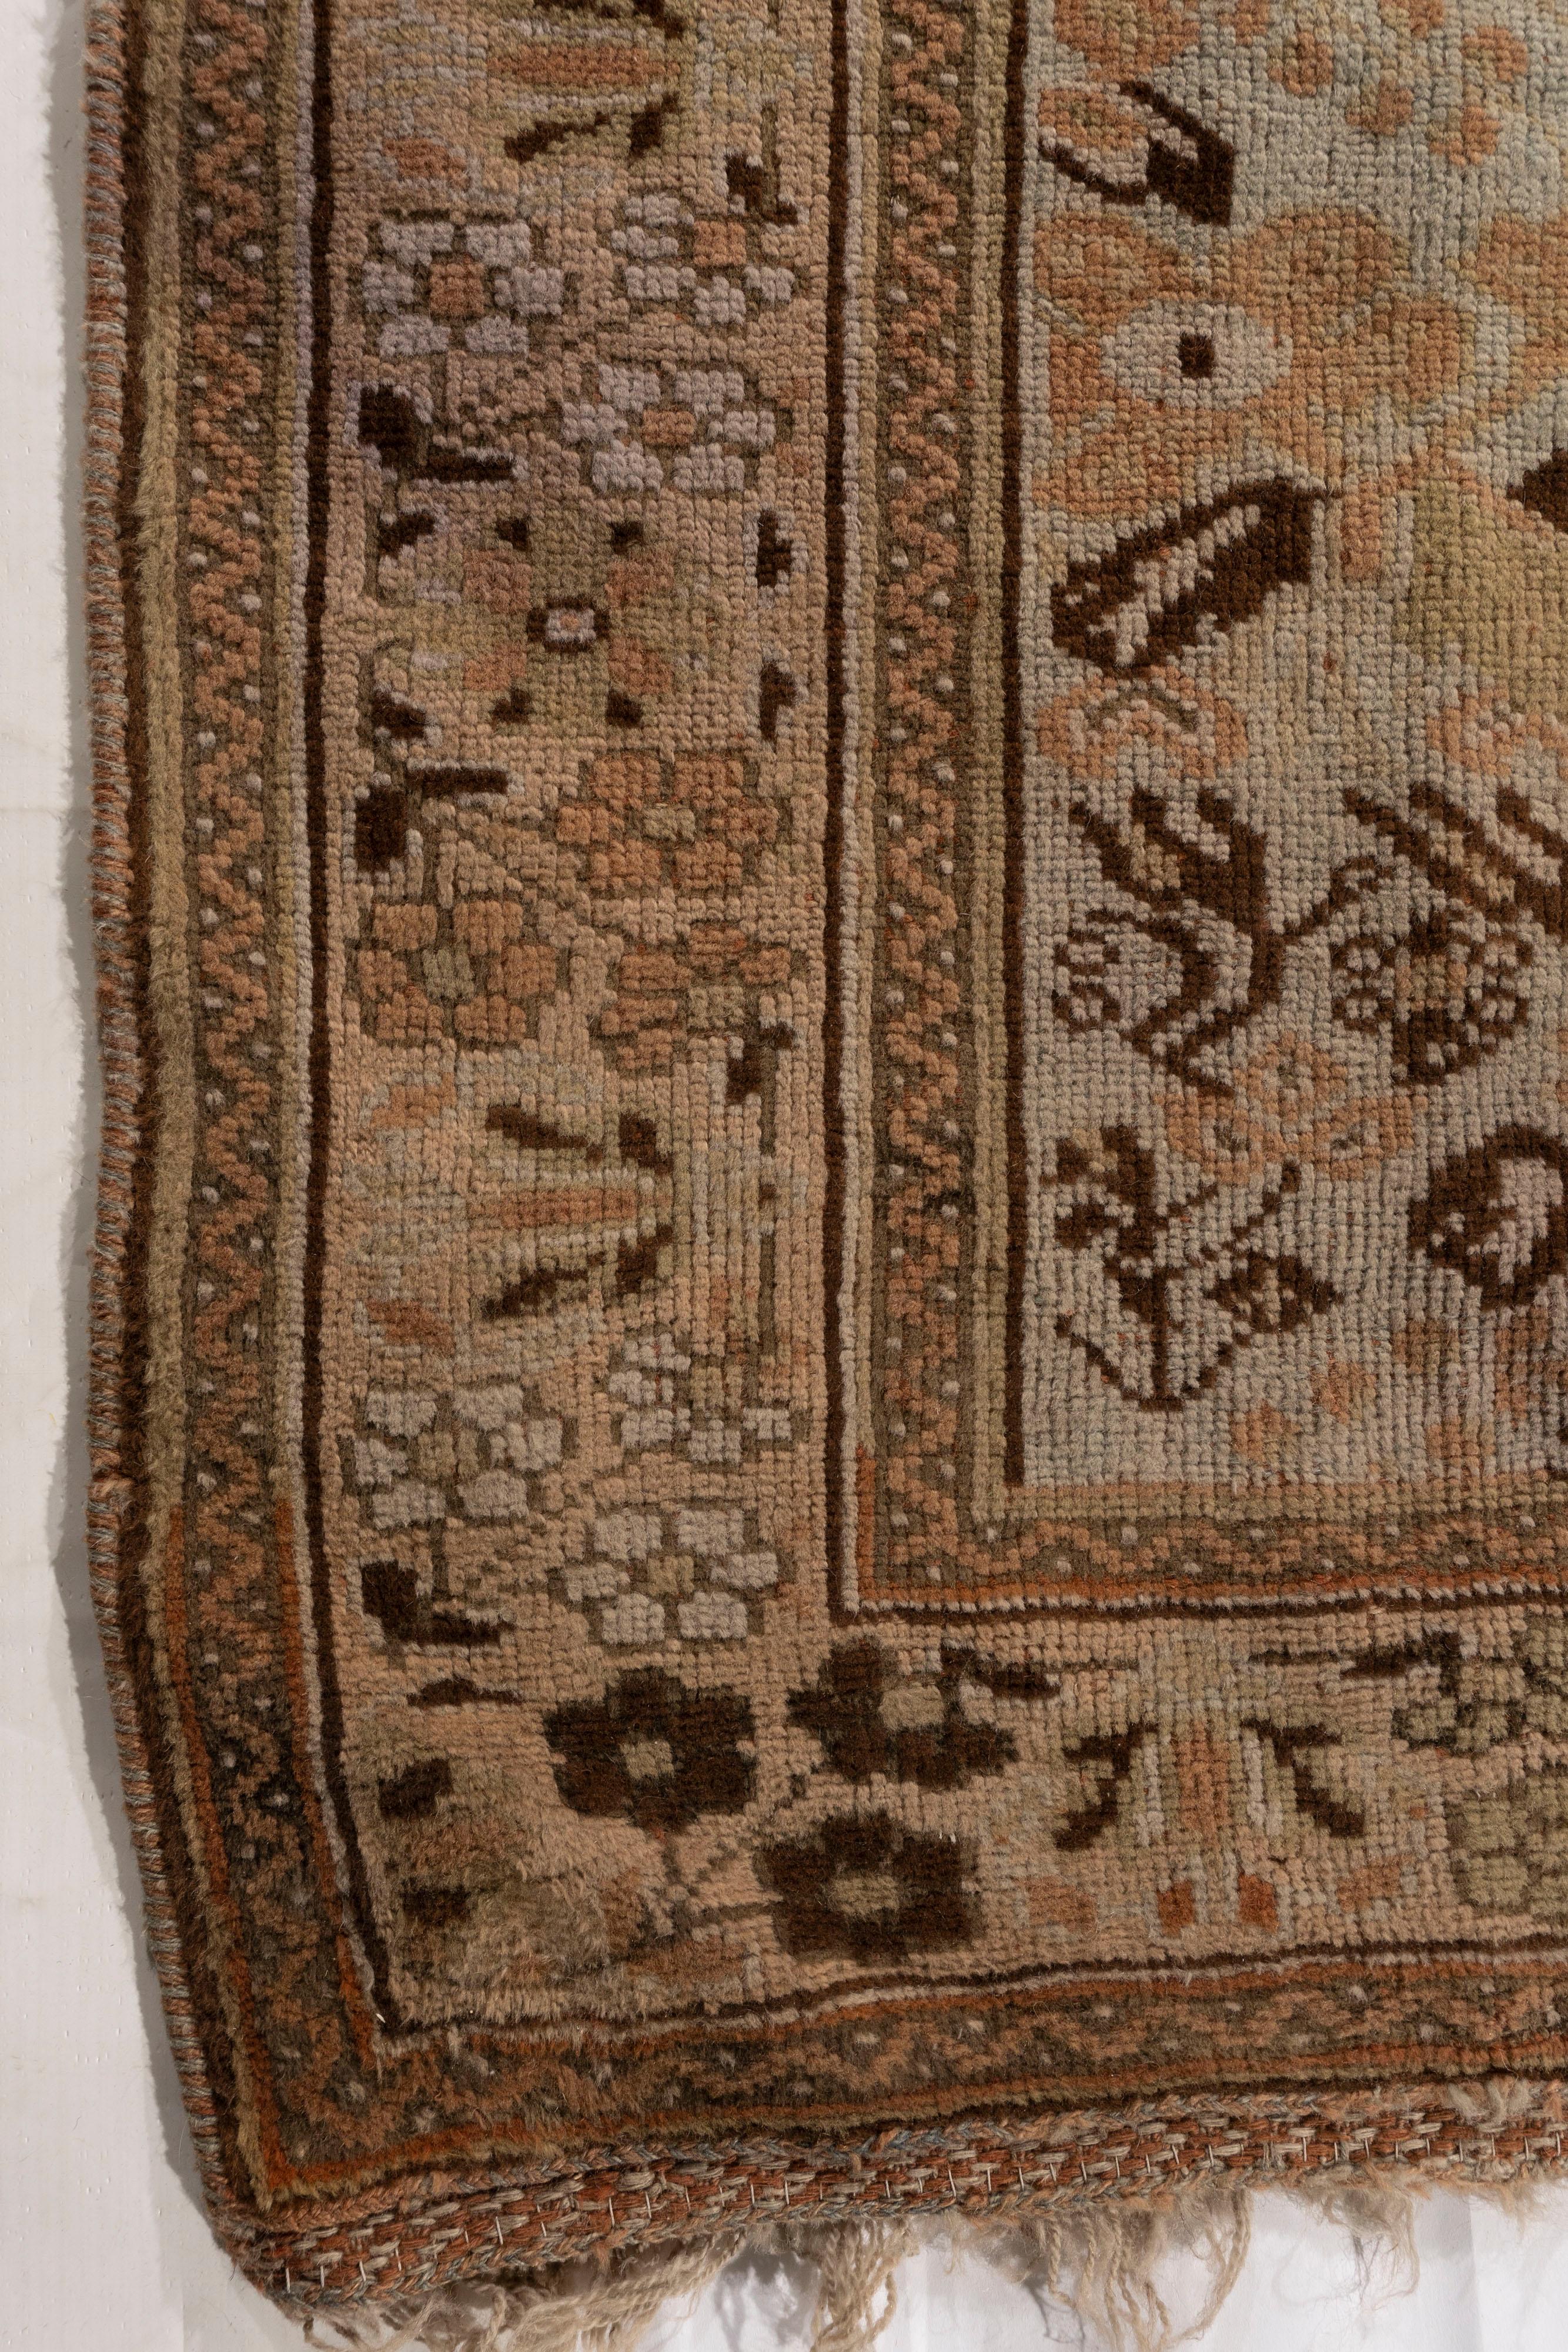 Vintage Persian Malayer Area rug measures: 3'1 x 6'3. Rugs from Malayer, east of Hamadan, could be considered top quality Hamadan’s and they share similar structural aspects. The term Mishan relates to a village where the very best Malayer's come